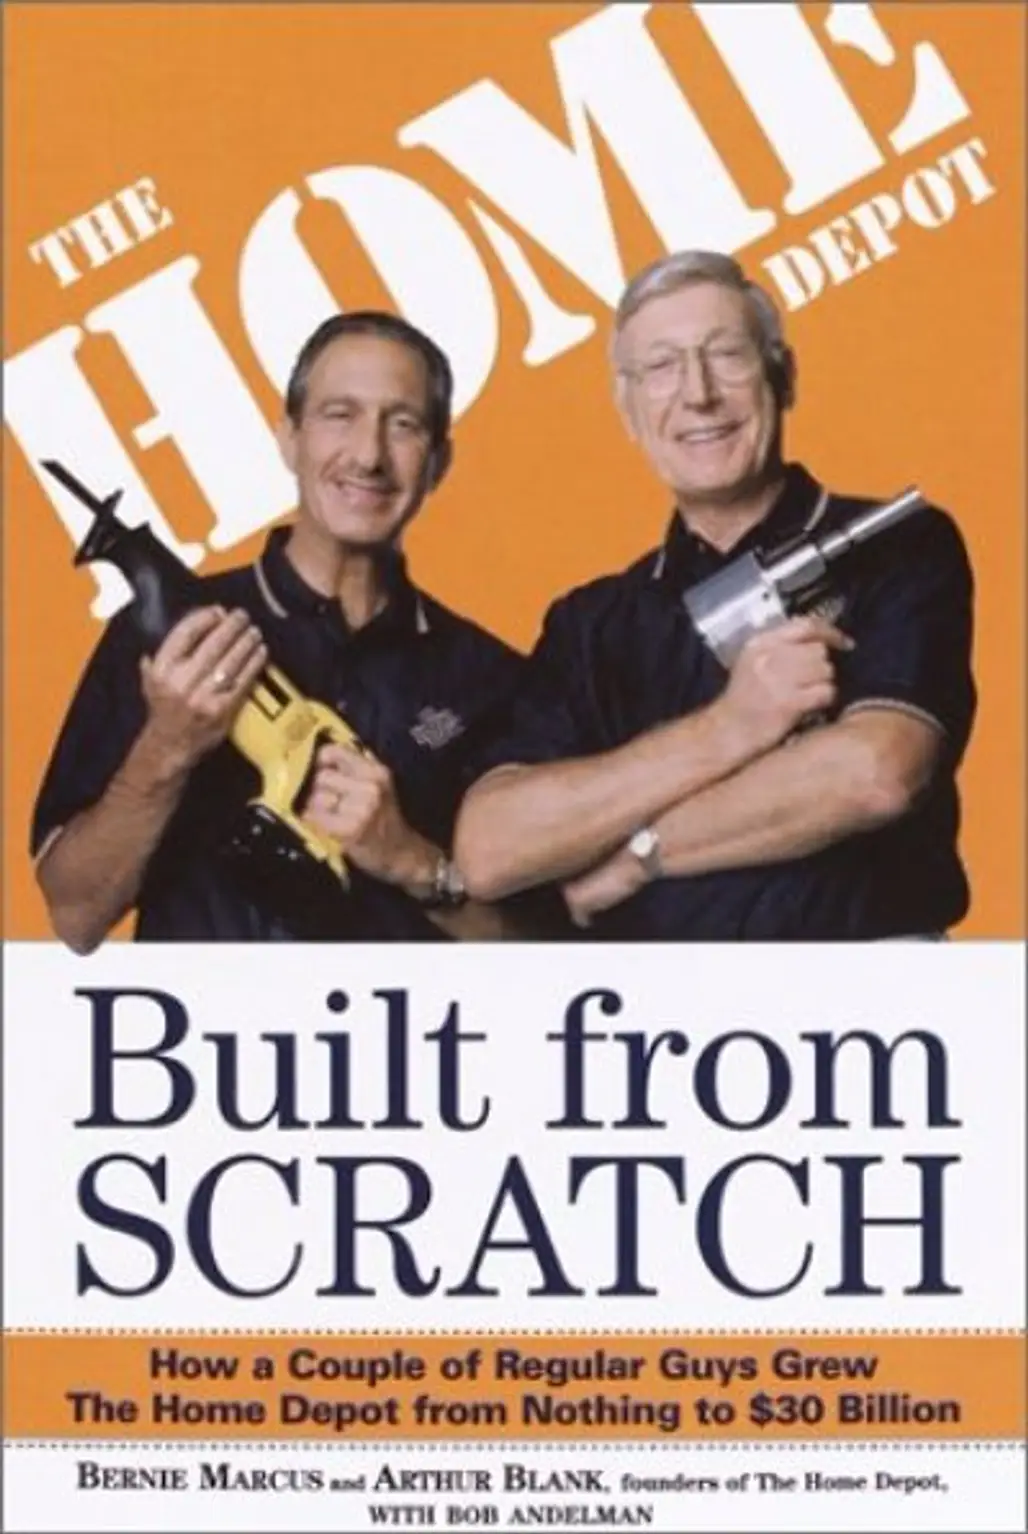 Built from Scratch: How a Couple of Regular Guys Grew the Home Depot from Nothing to $30 Billion – Bernie Marcus, Arthur Blank